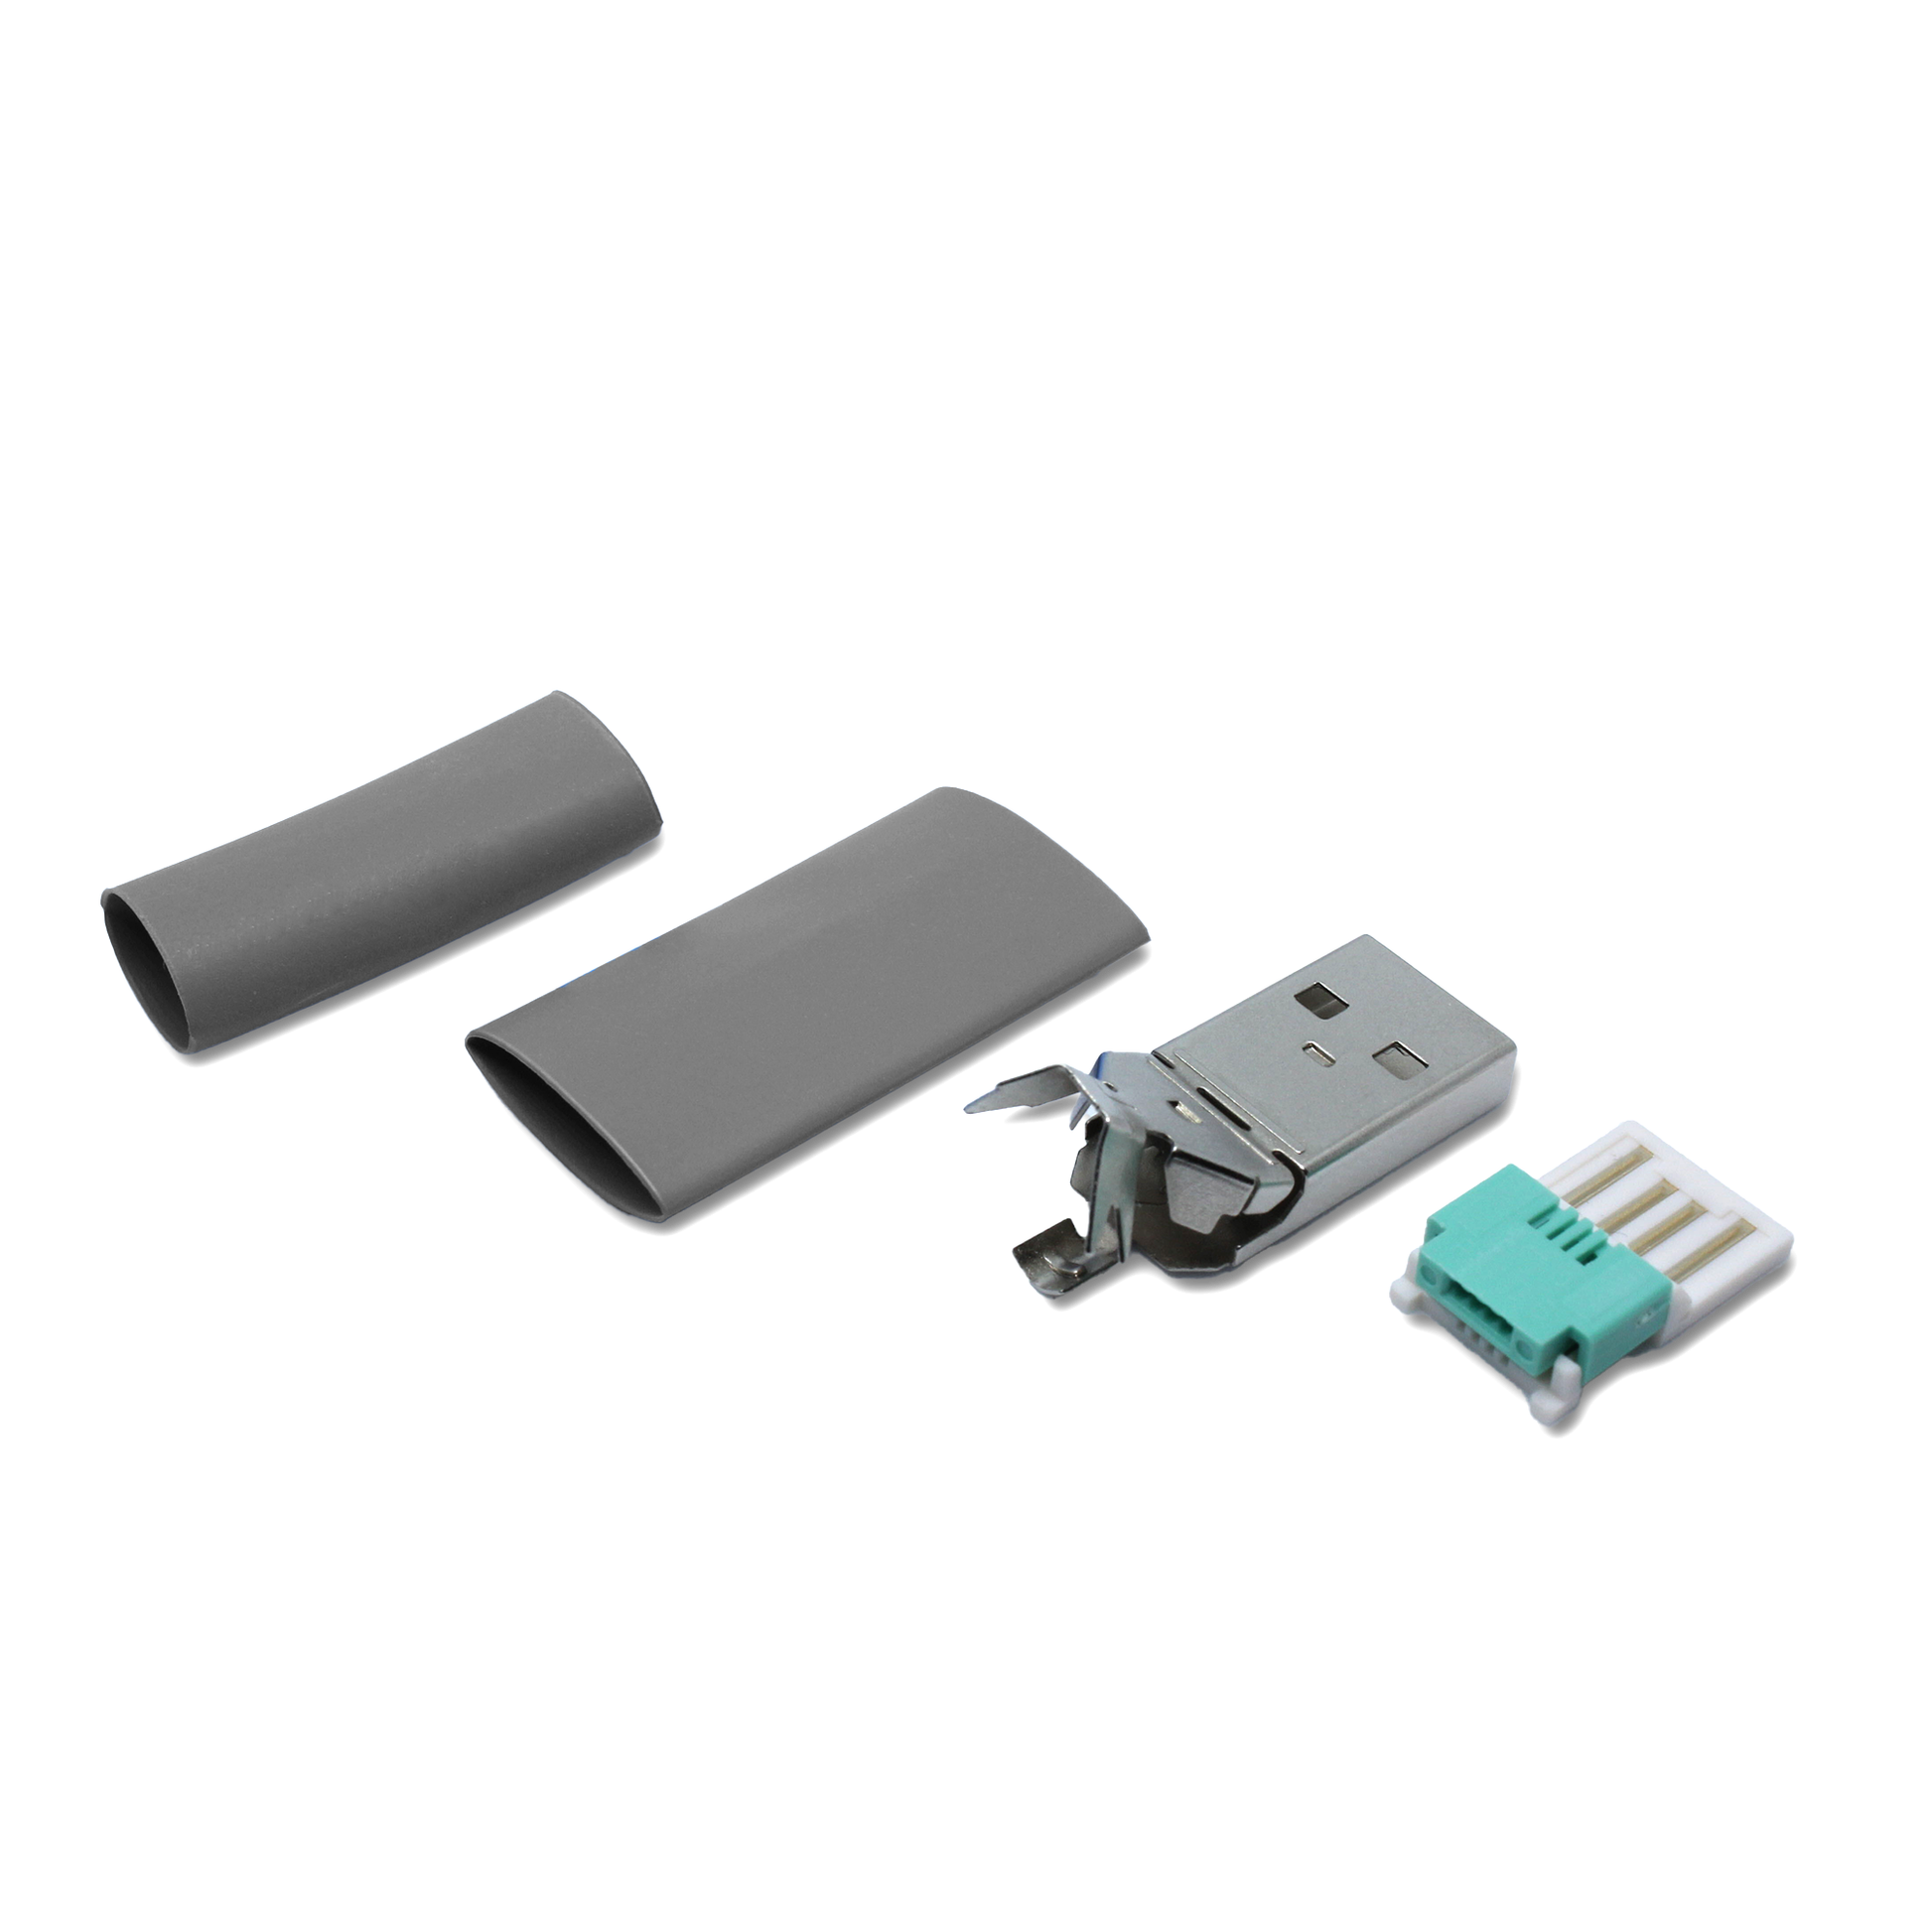 USB A plug spare part grey in single parts, with additional small heat shrink tube for repair (solderless/crimp) thin USB 2.0 cable